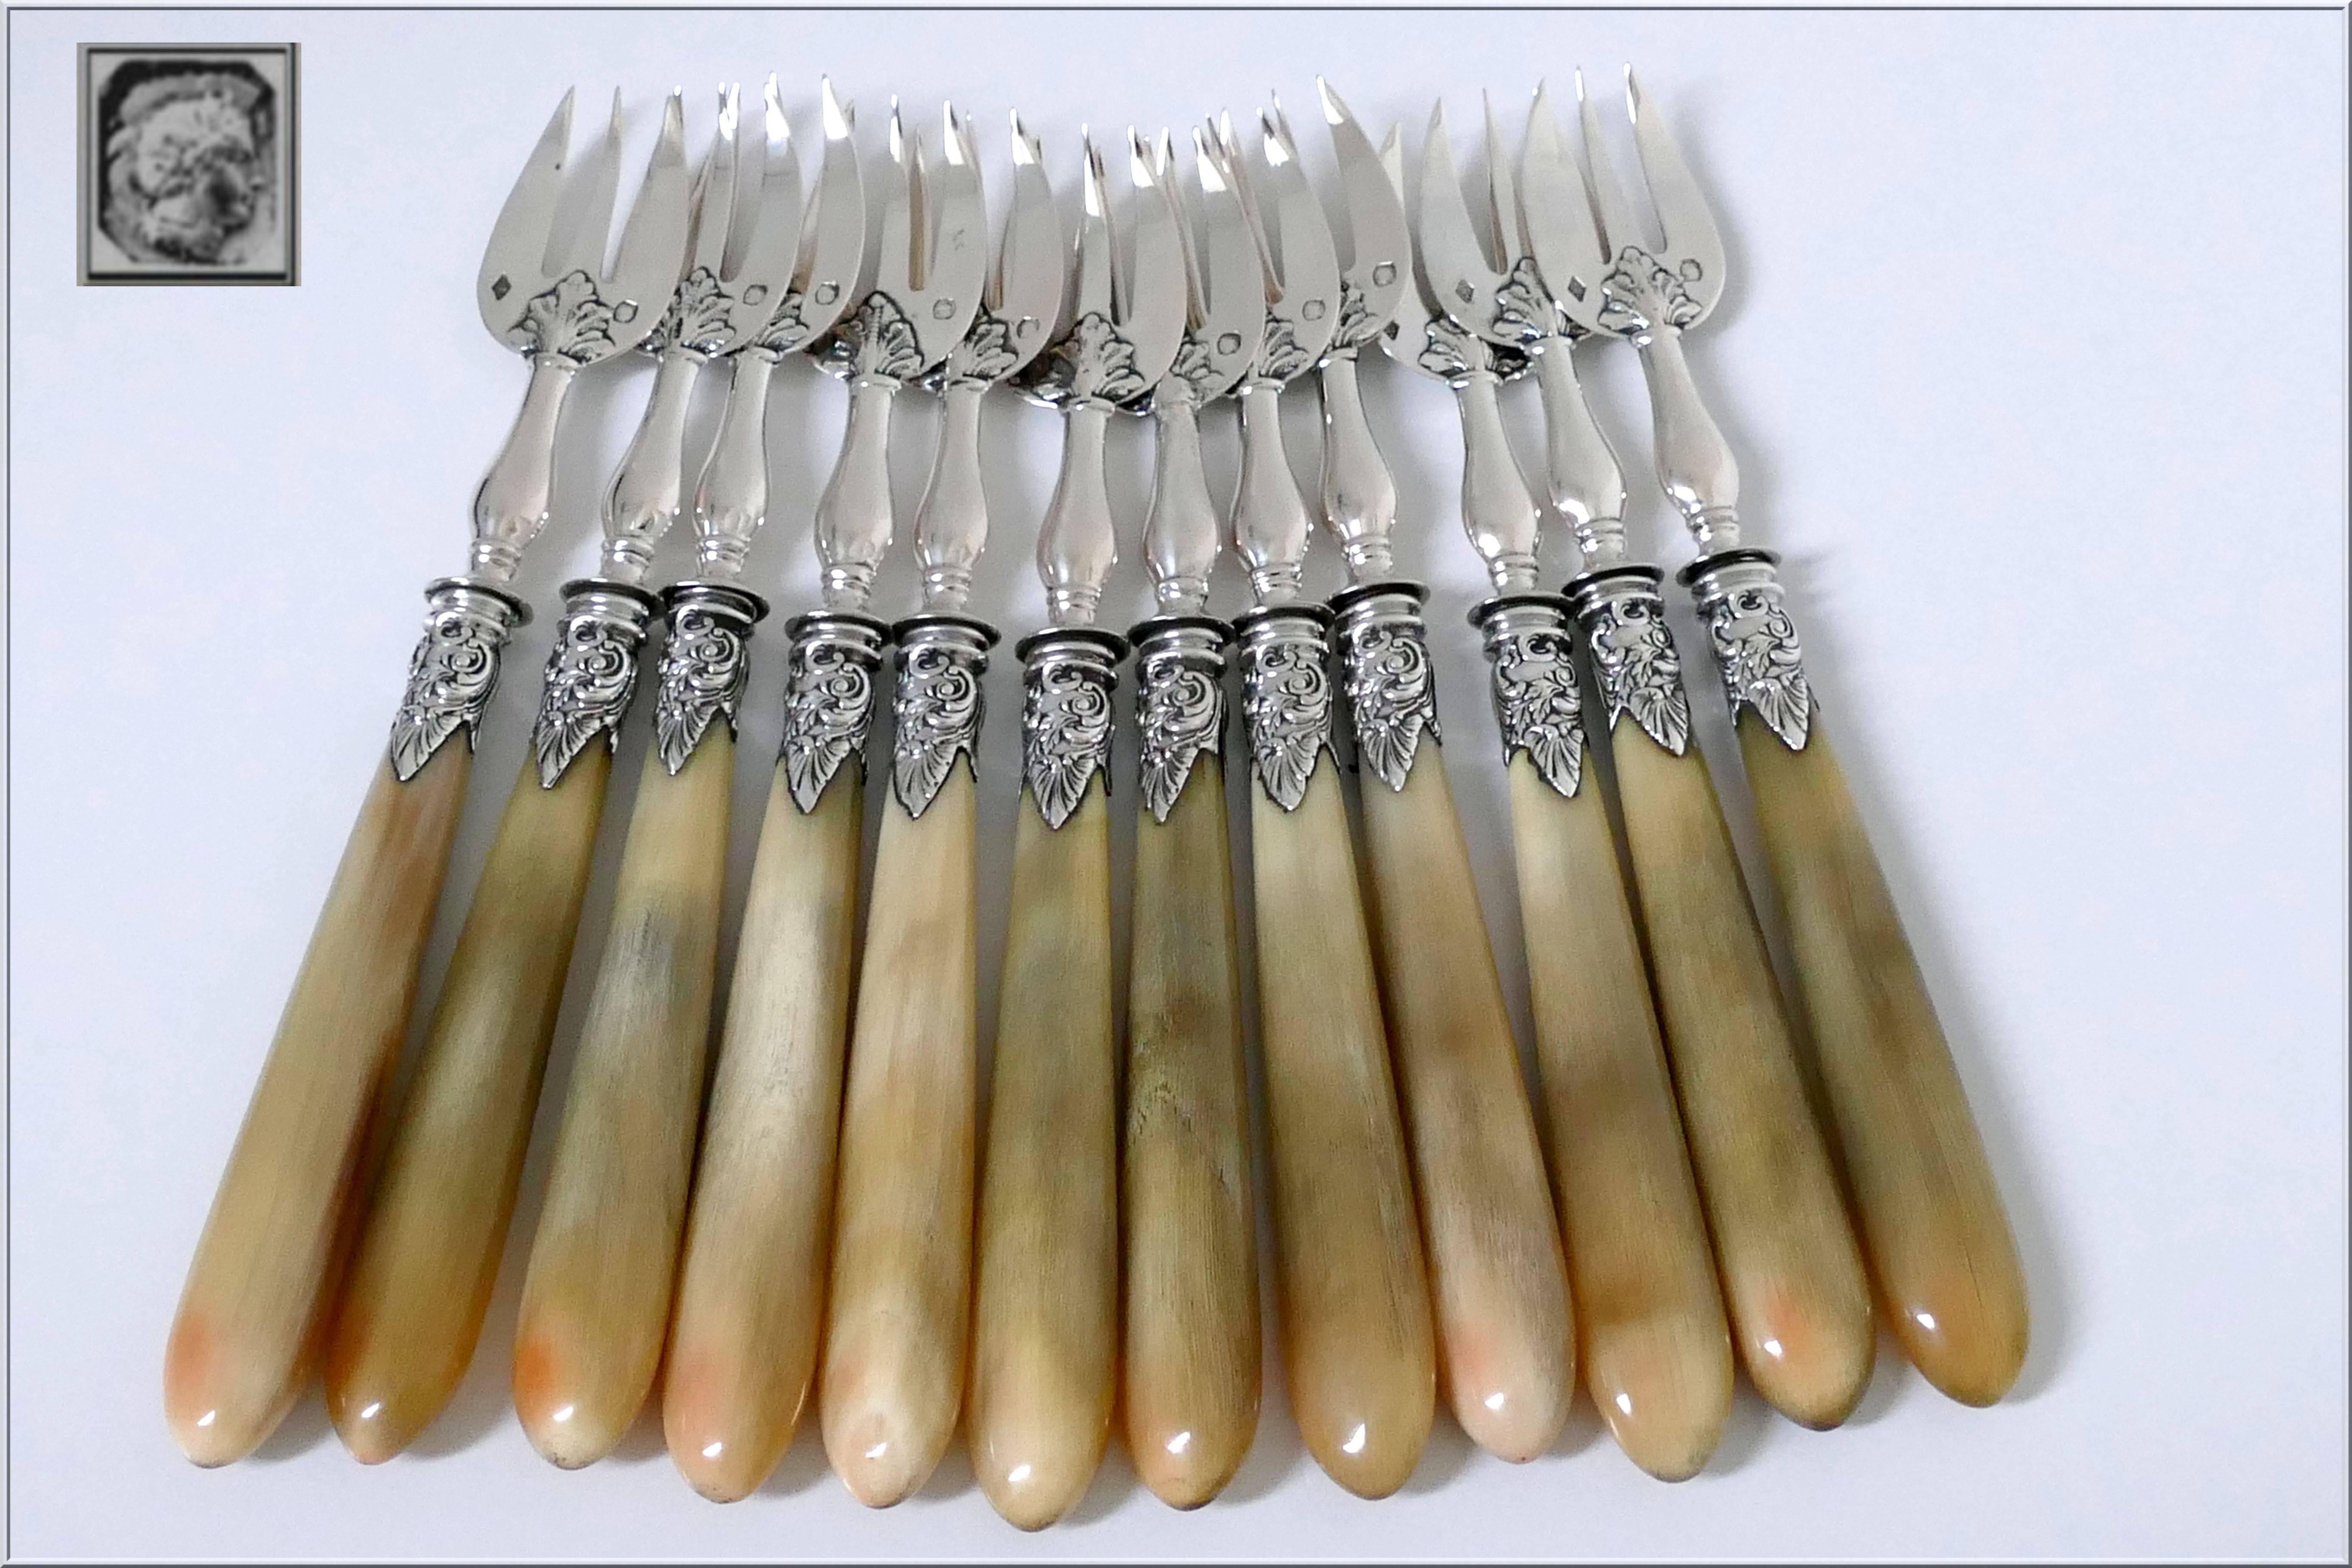 Late 19th Century Soufflot French Sterling Silver Horn Oyster Forks Set of 12 Pieces, Original Box